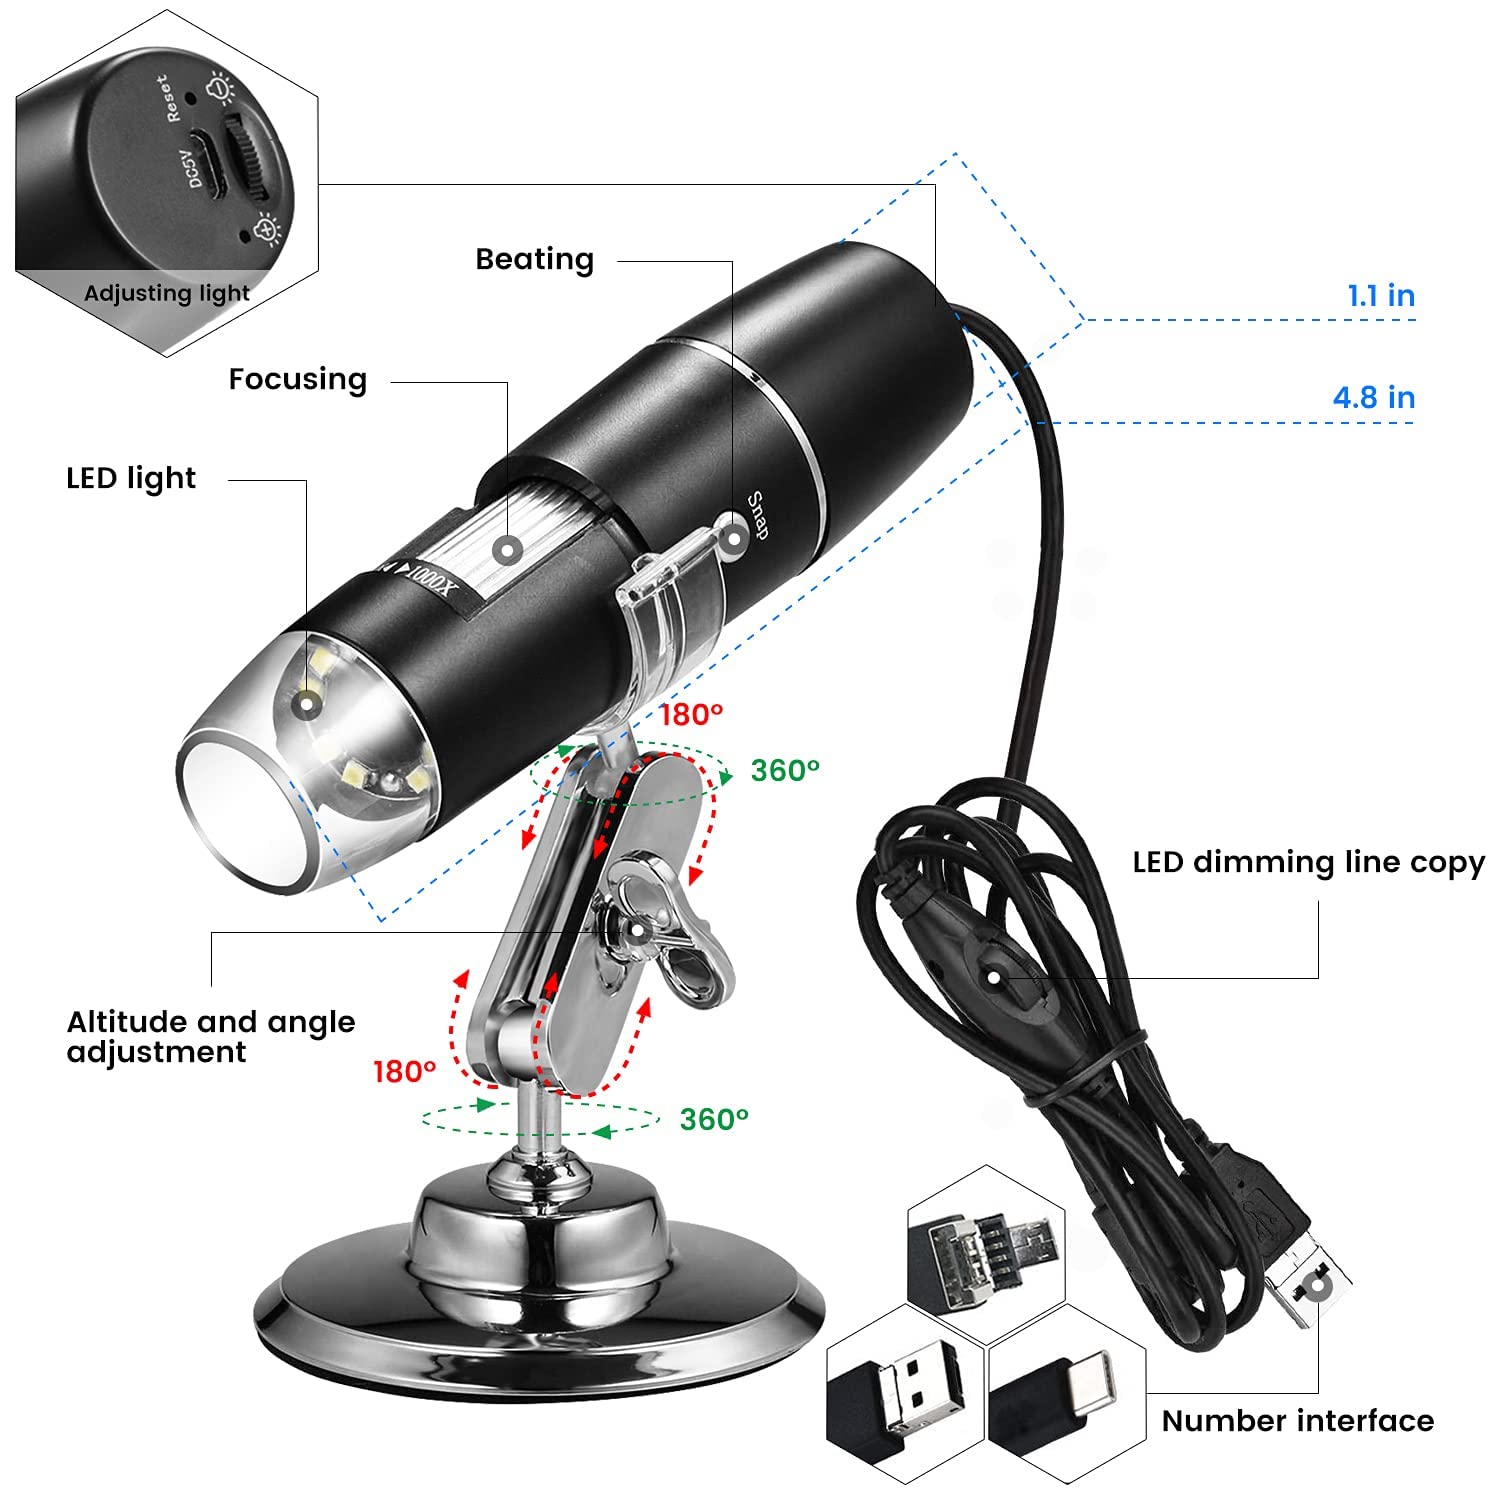 Lady House Handheld USB Digital Microscope with Metal Stand, Portable HD 1000 X Magnification Inspection Camera with 8 LED Light for Android Mac Windows Computer